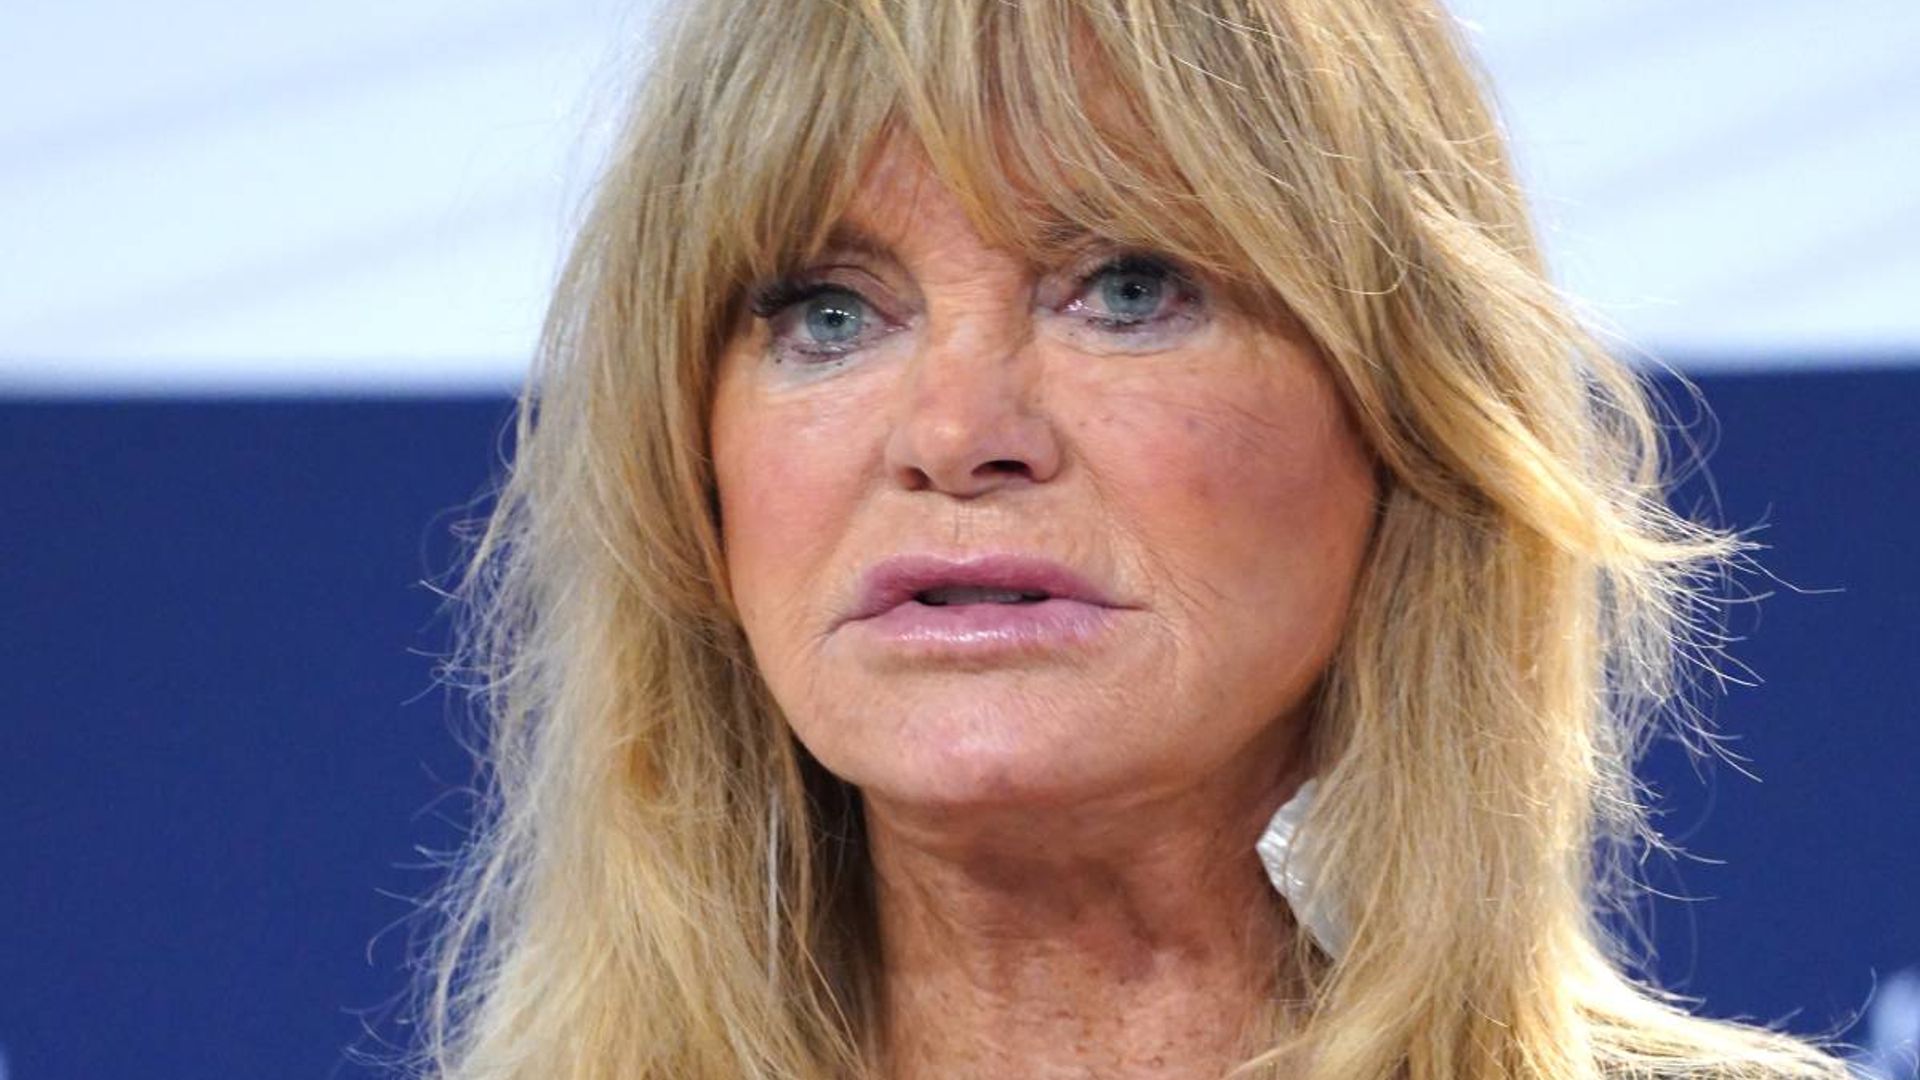 goldie hawn worries fans urged to be careful